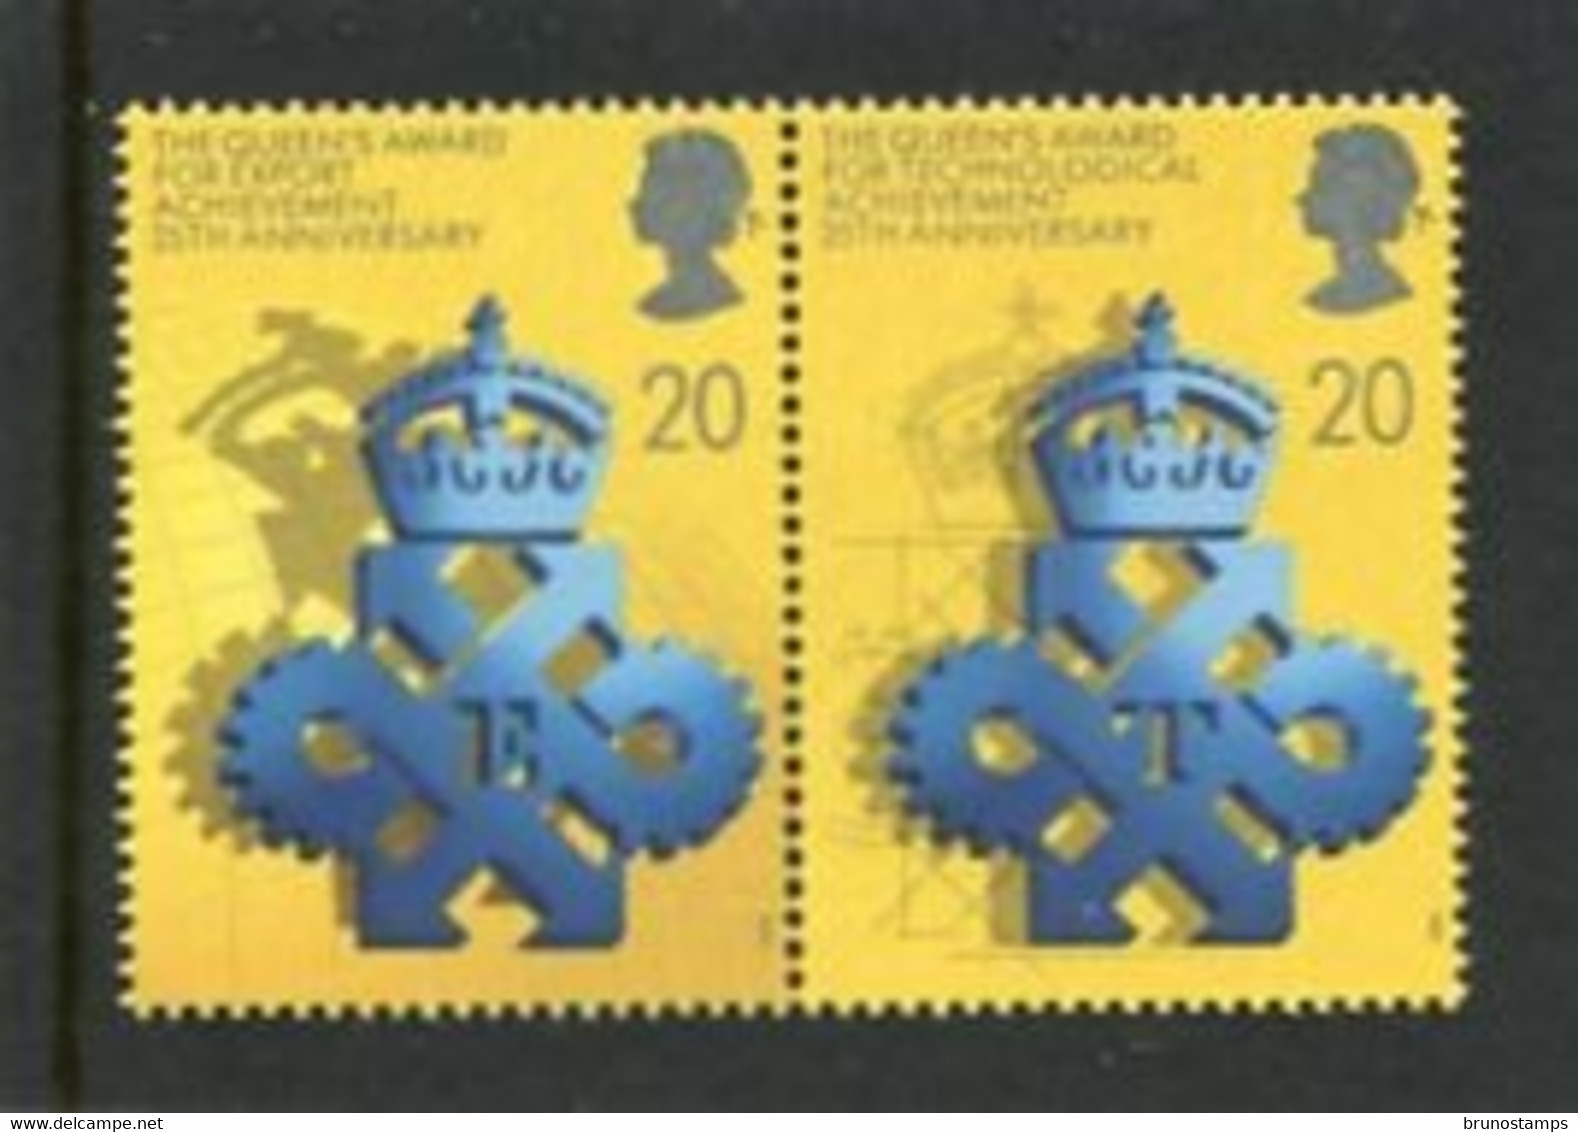 GREAT BRITAIN - 1990  20p  QUEEN'S  AWARDS  PAIR  MINT NH - Unclassified